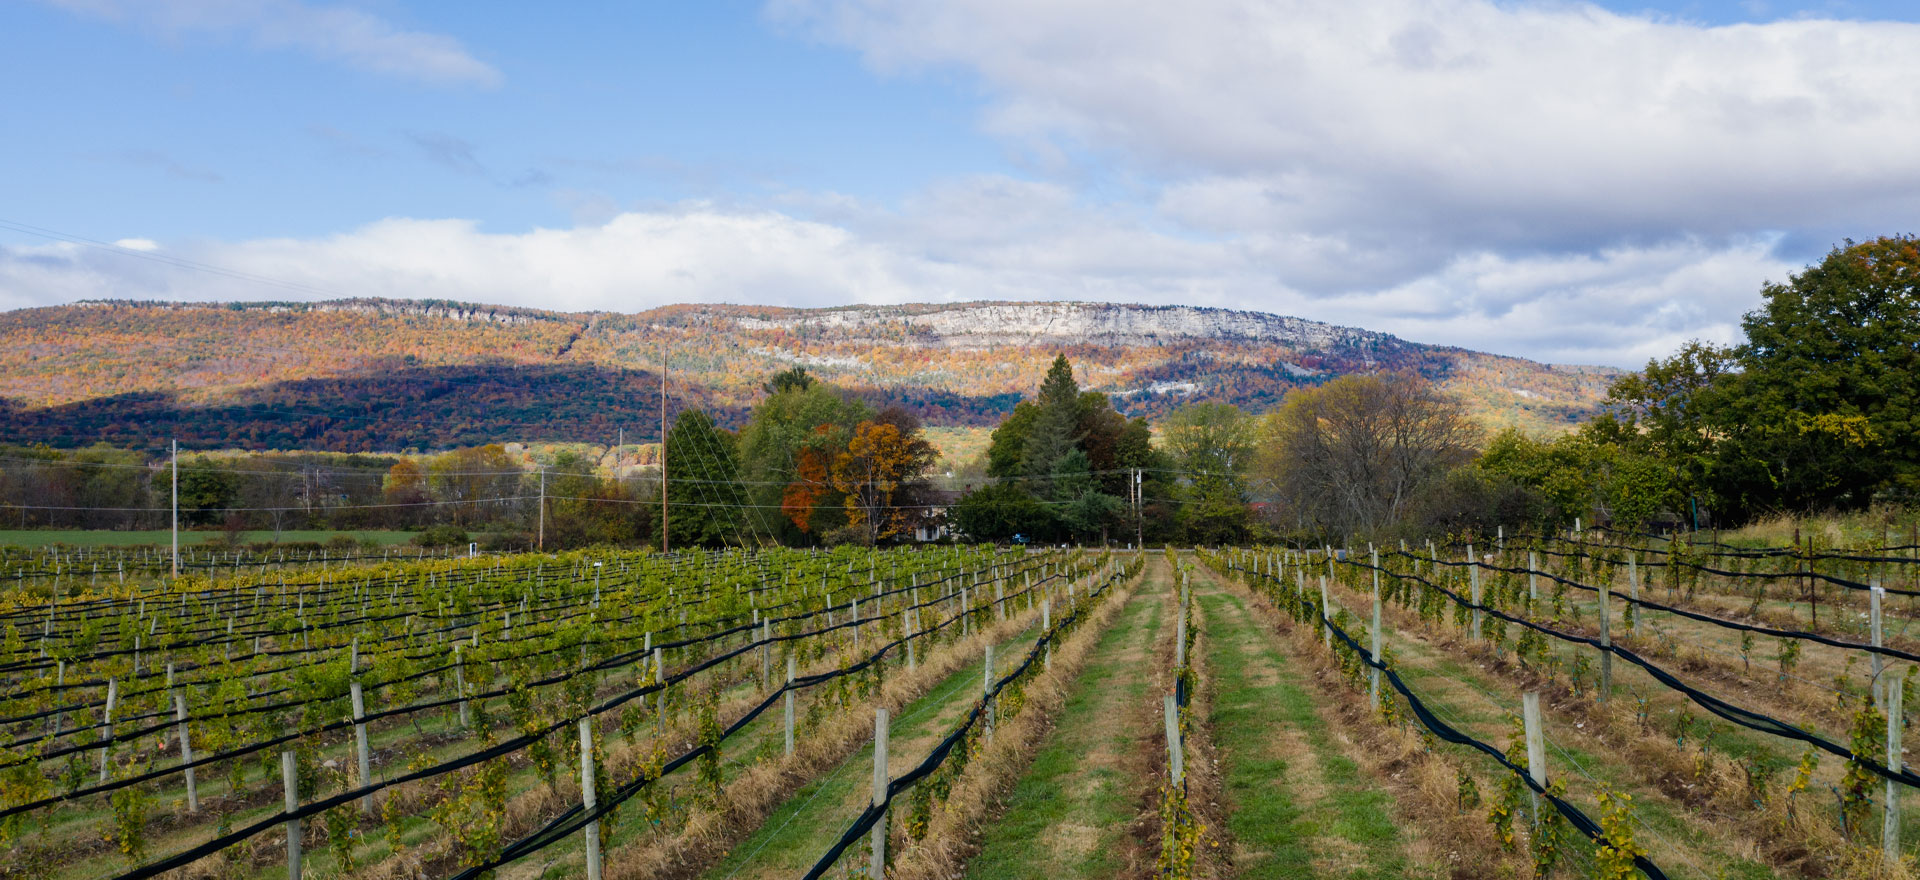 Whitecliff Vineyard & Winery: Tasting with a Hudson Valley Pioneer